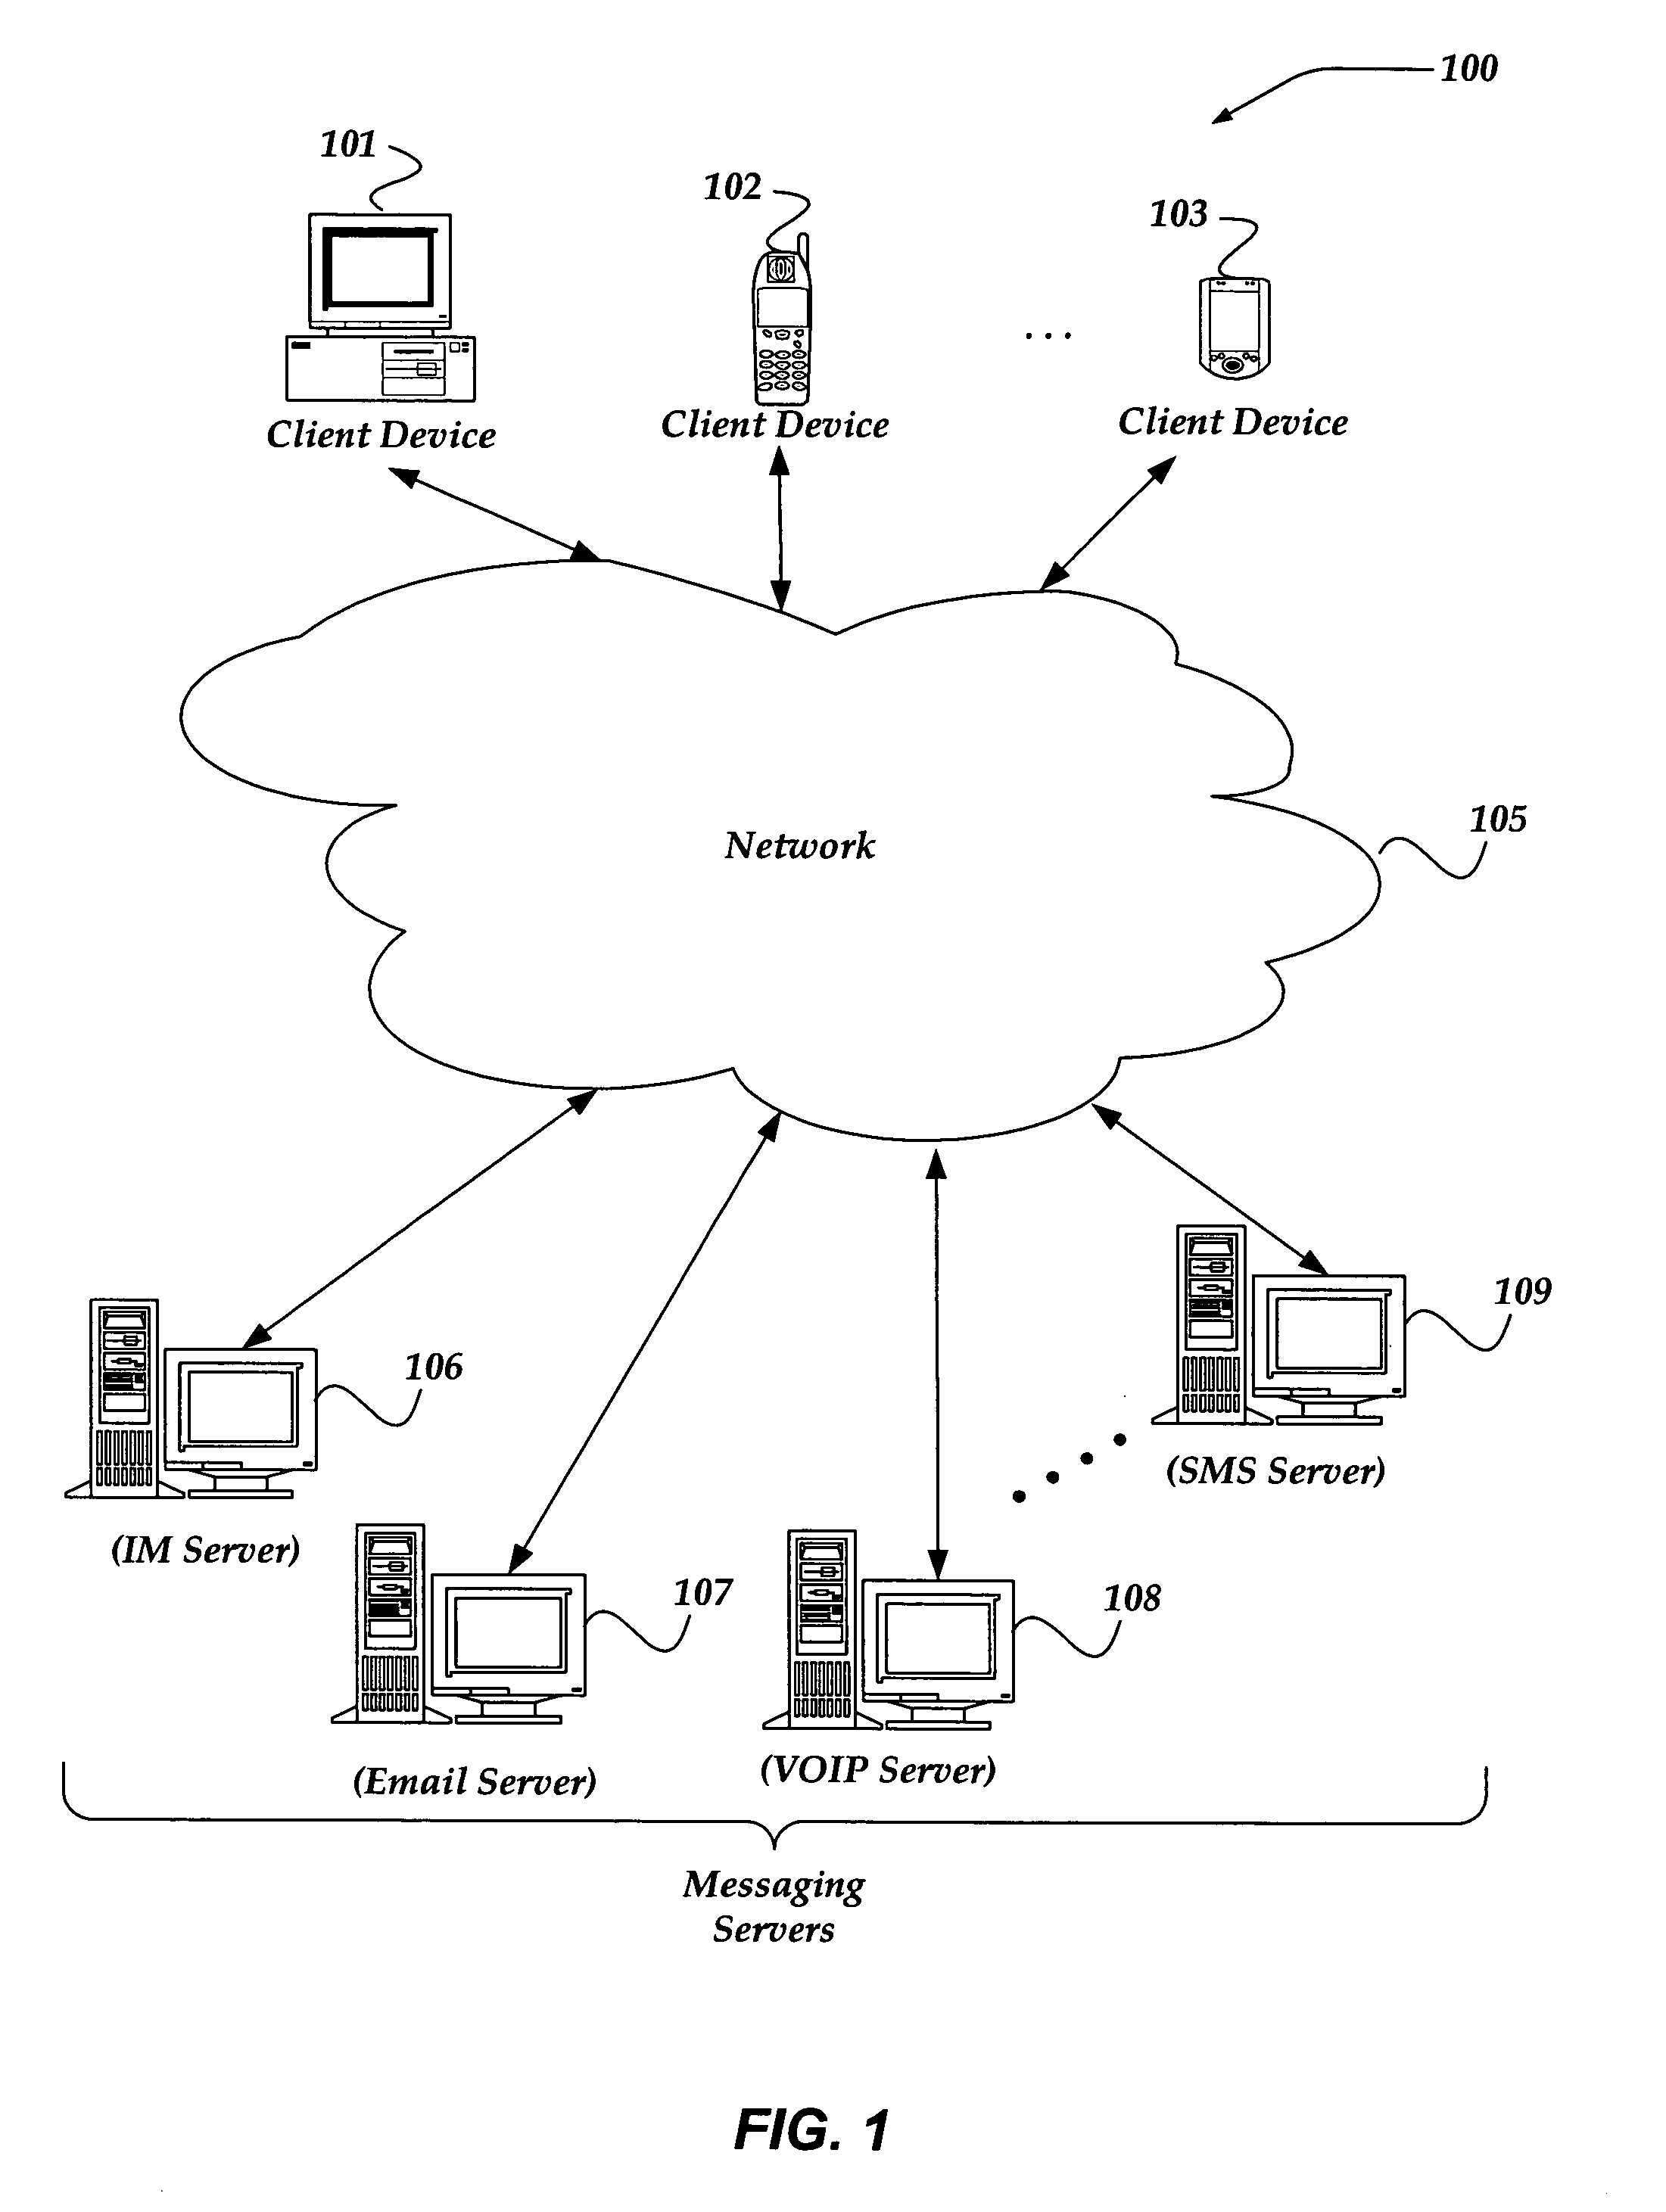 Multi-modal auto complete function for a connection